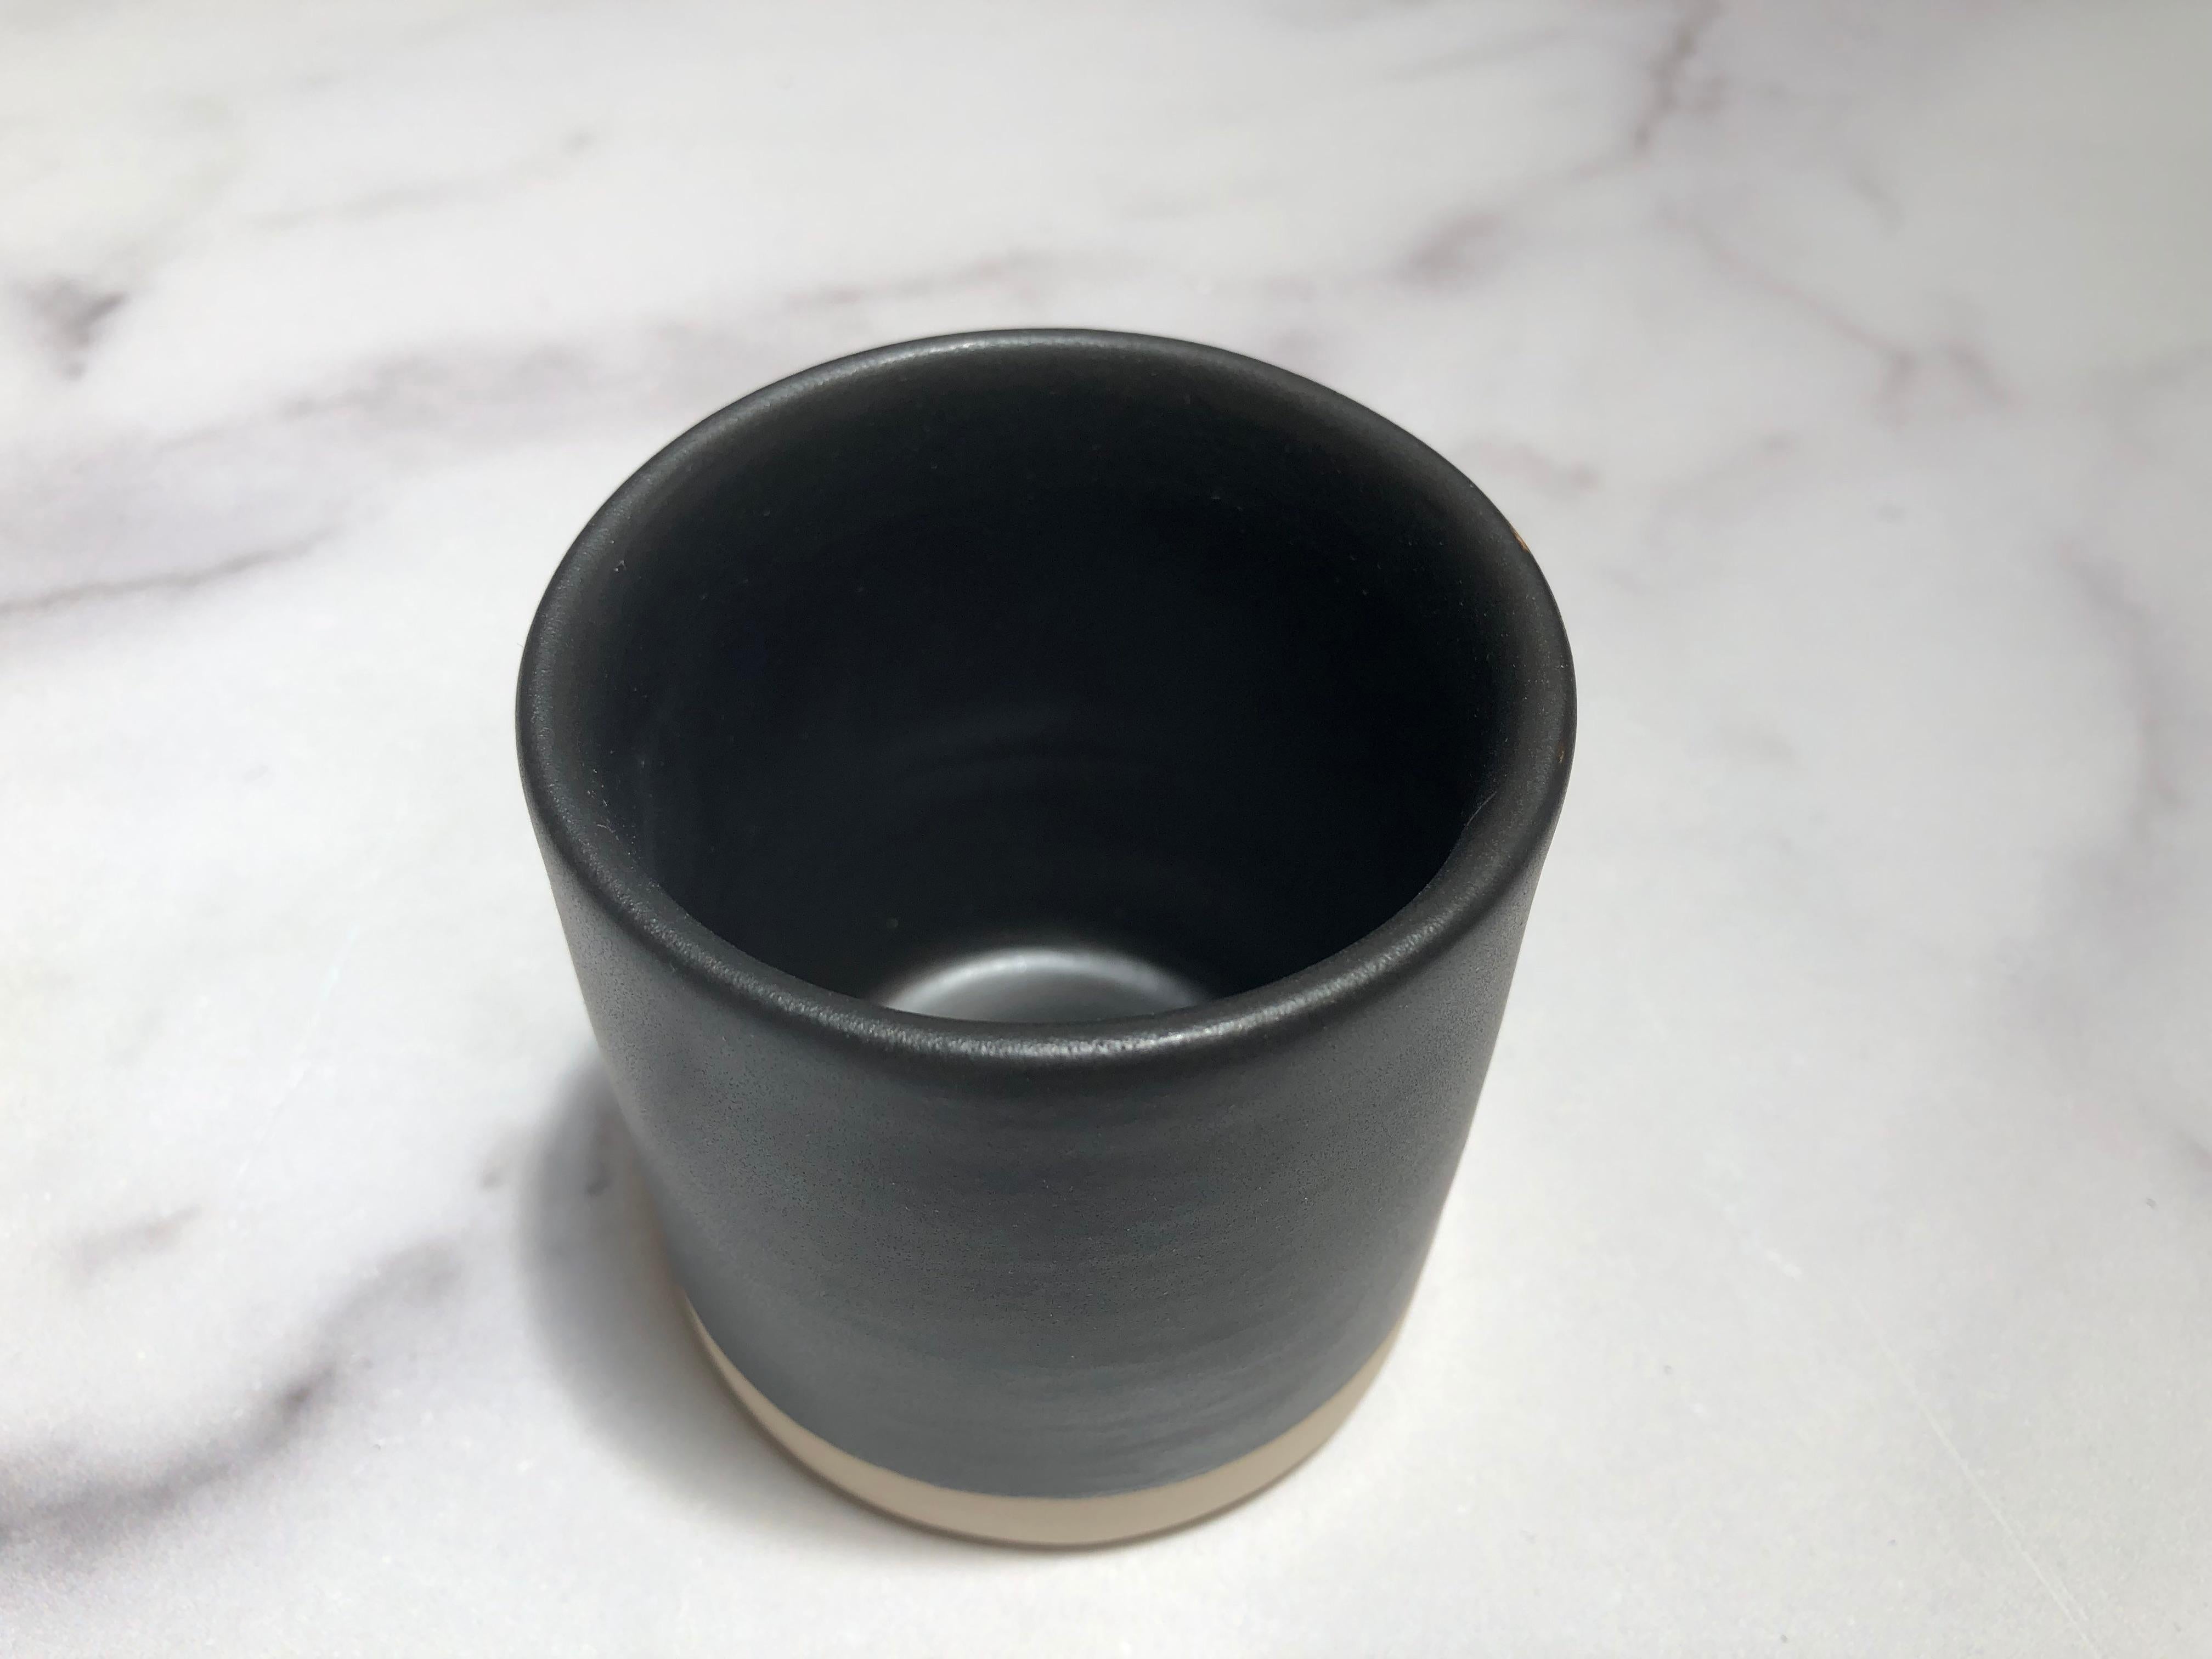 Handmade and hand painted ceramics from one of the mother countries, Portugal, these beautiful pieces for your table will add a modern touch and are perfect to mix and match. This tumbler comes in black or white.

Size: 3.25” height